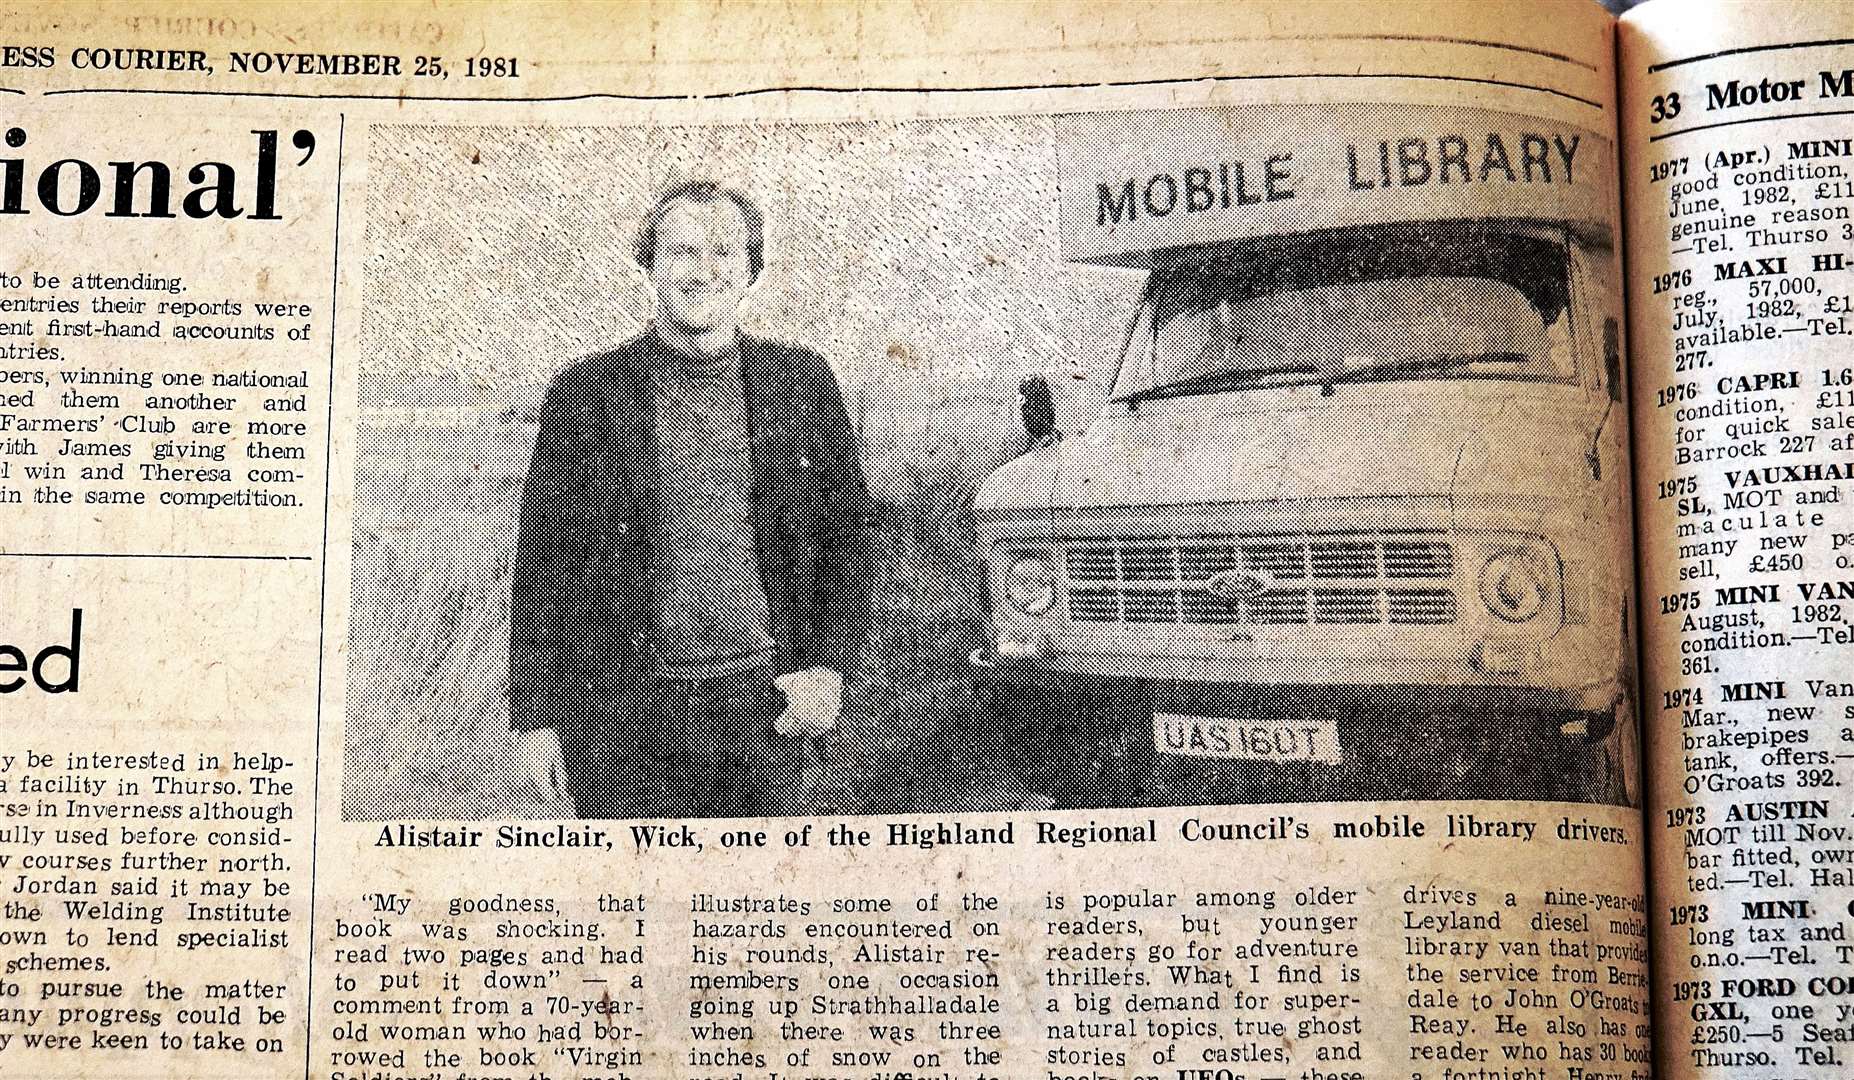 Alistair was feayured in the Caithness Courier in 1981.